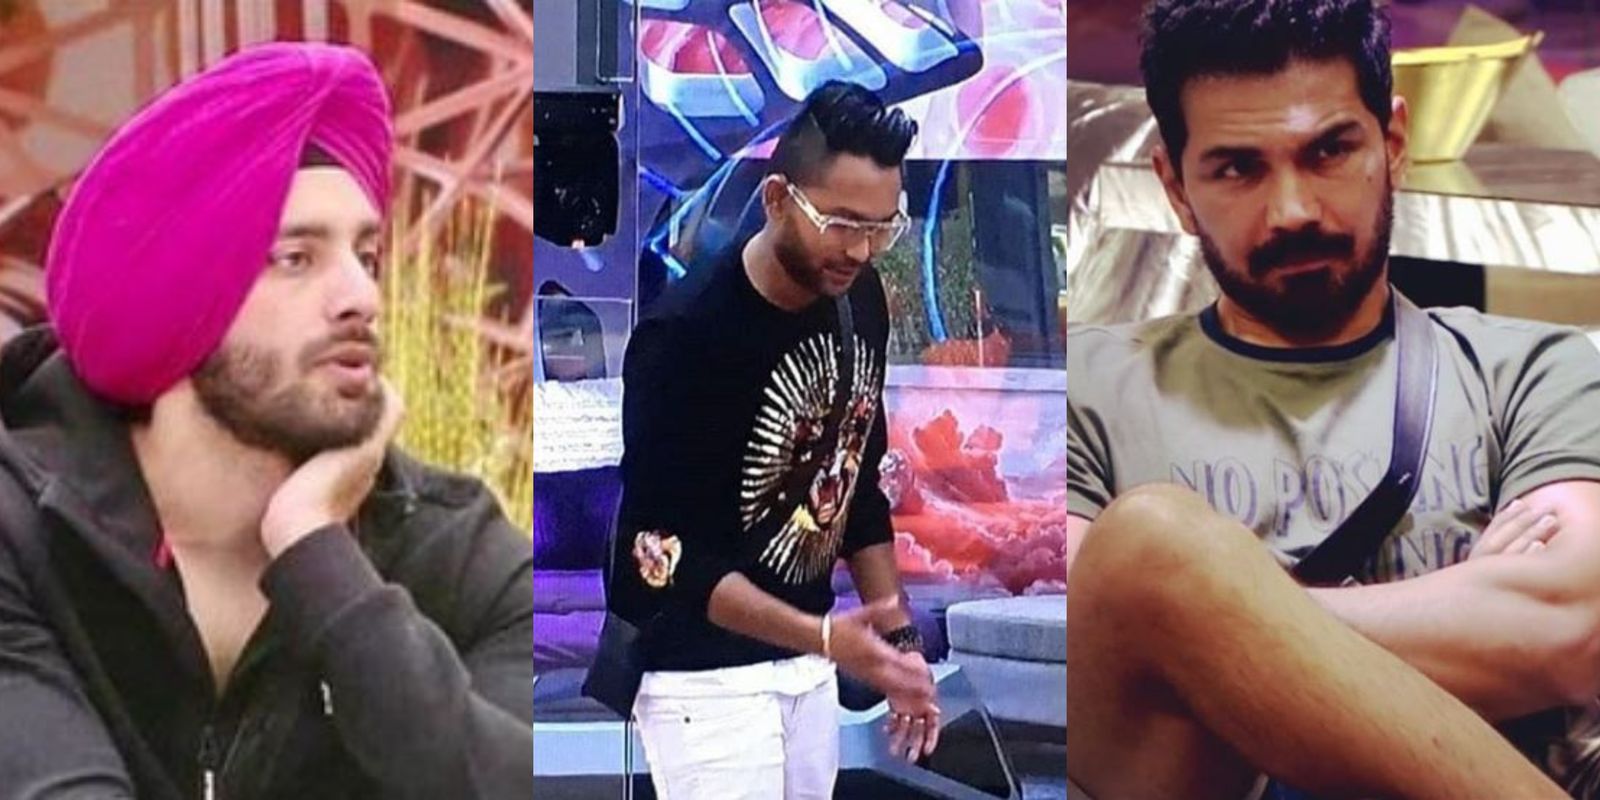 Bigg Boss 14: Shehzad Deol, Jaan Kumar Sanu And Abhinav Shukla In The Bottom 3; There Could Be A Double Eviction